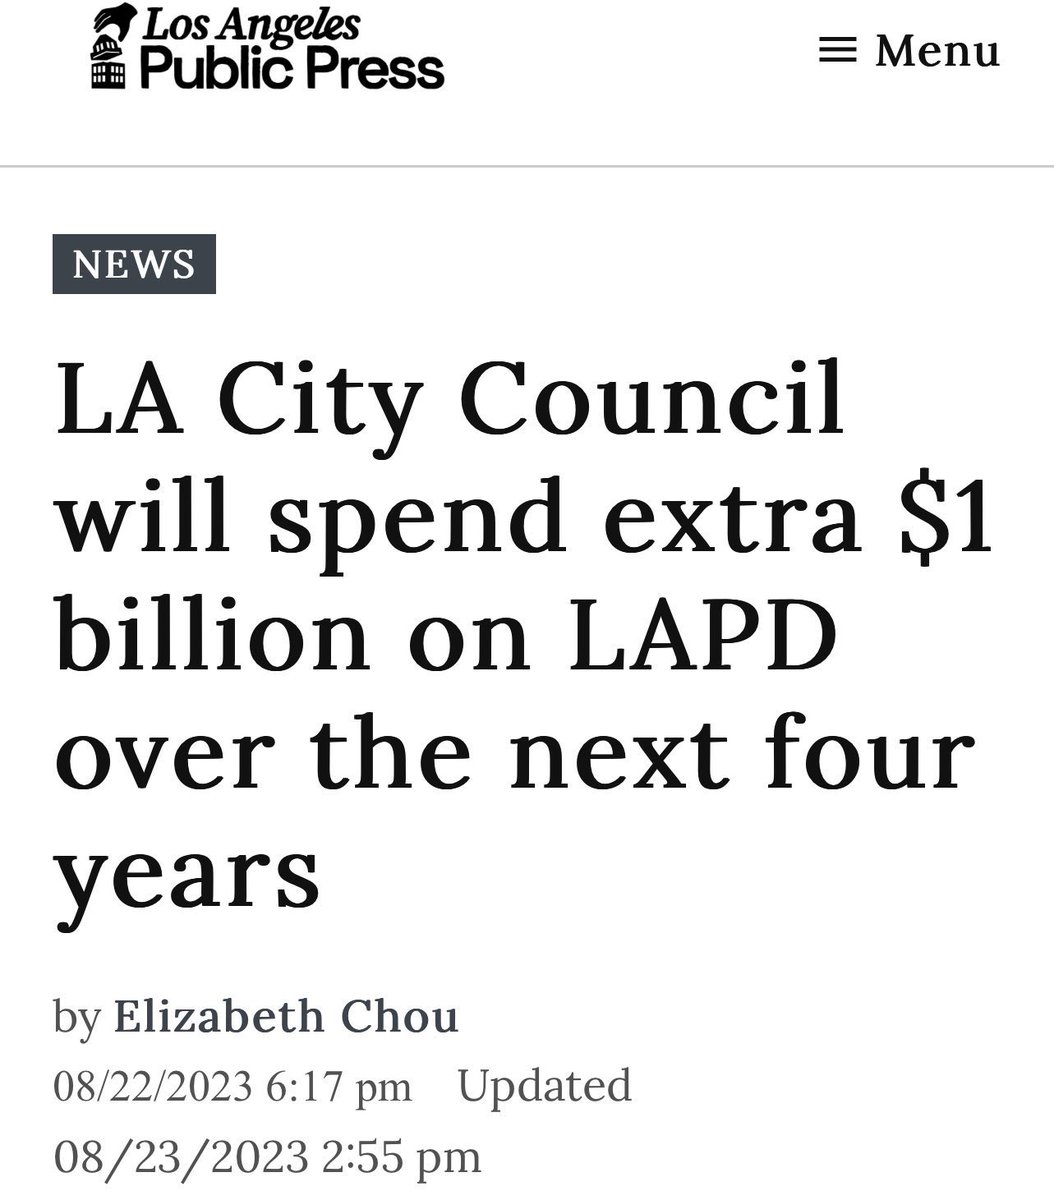 Someone who is good at the economy please help budget this. Our city is dying.